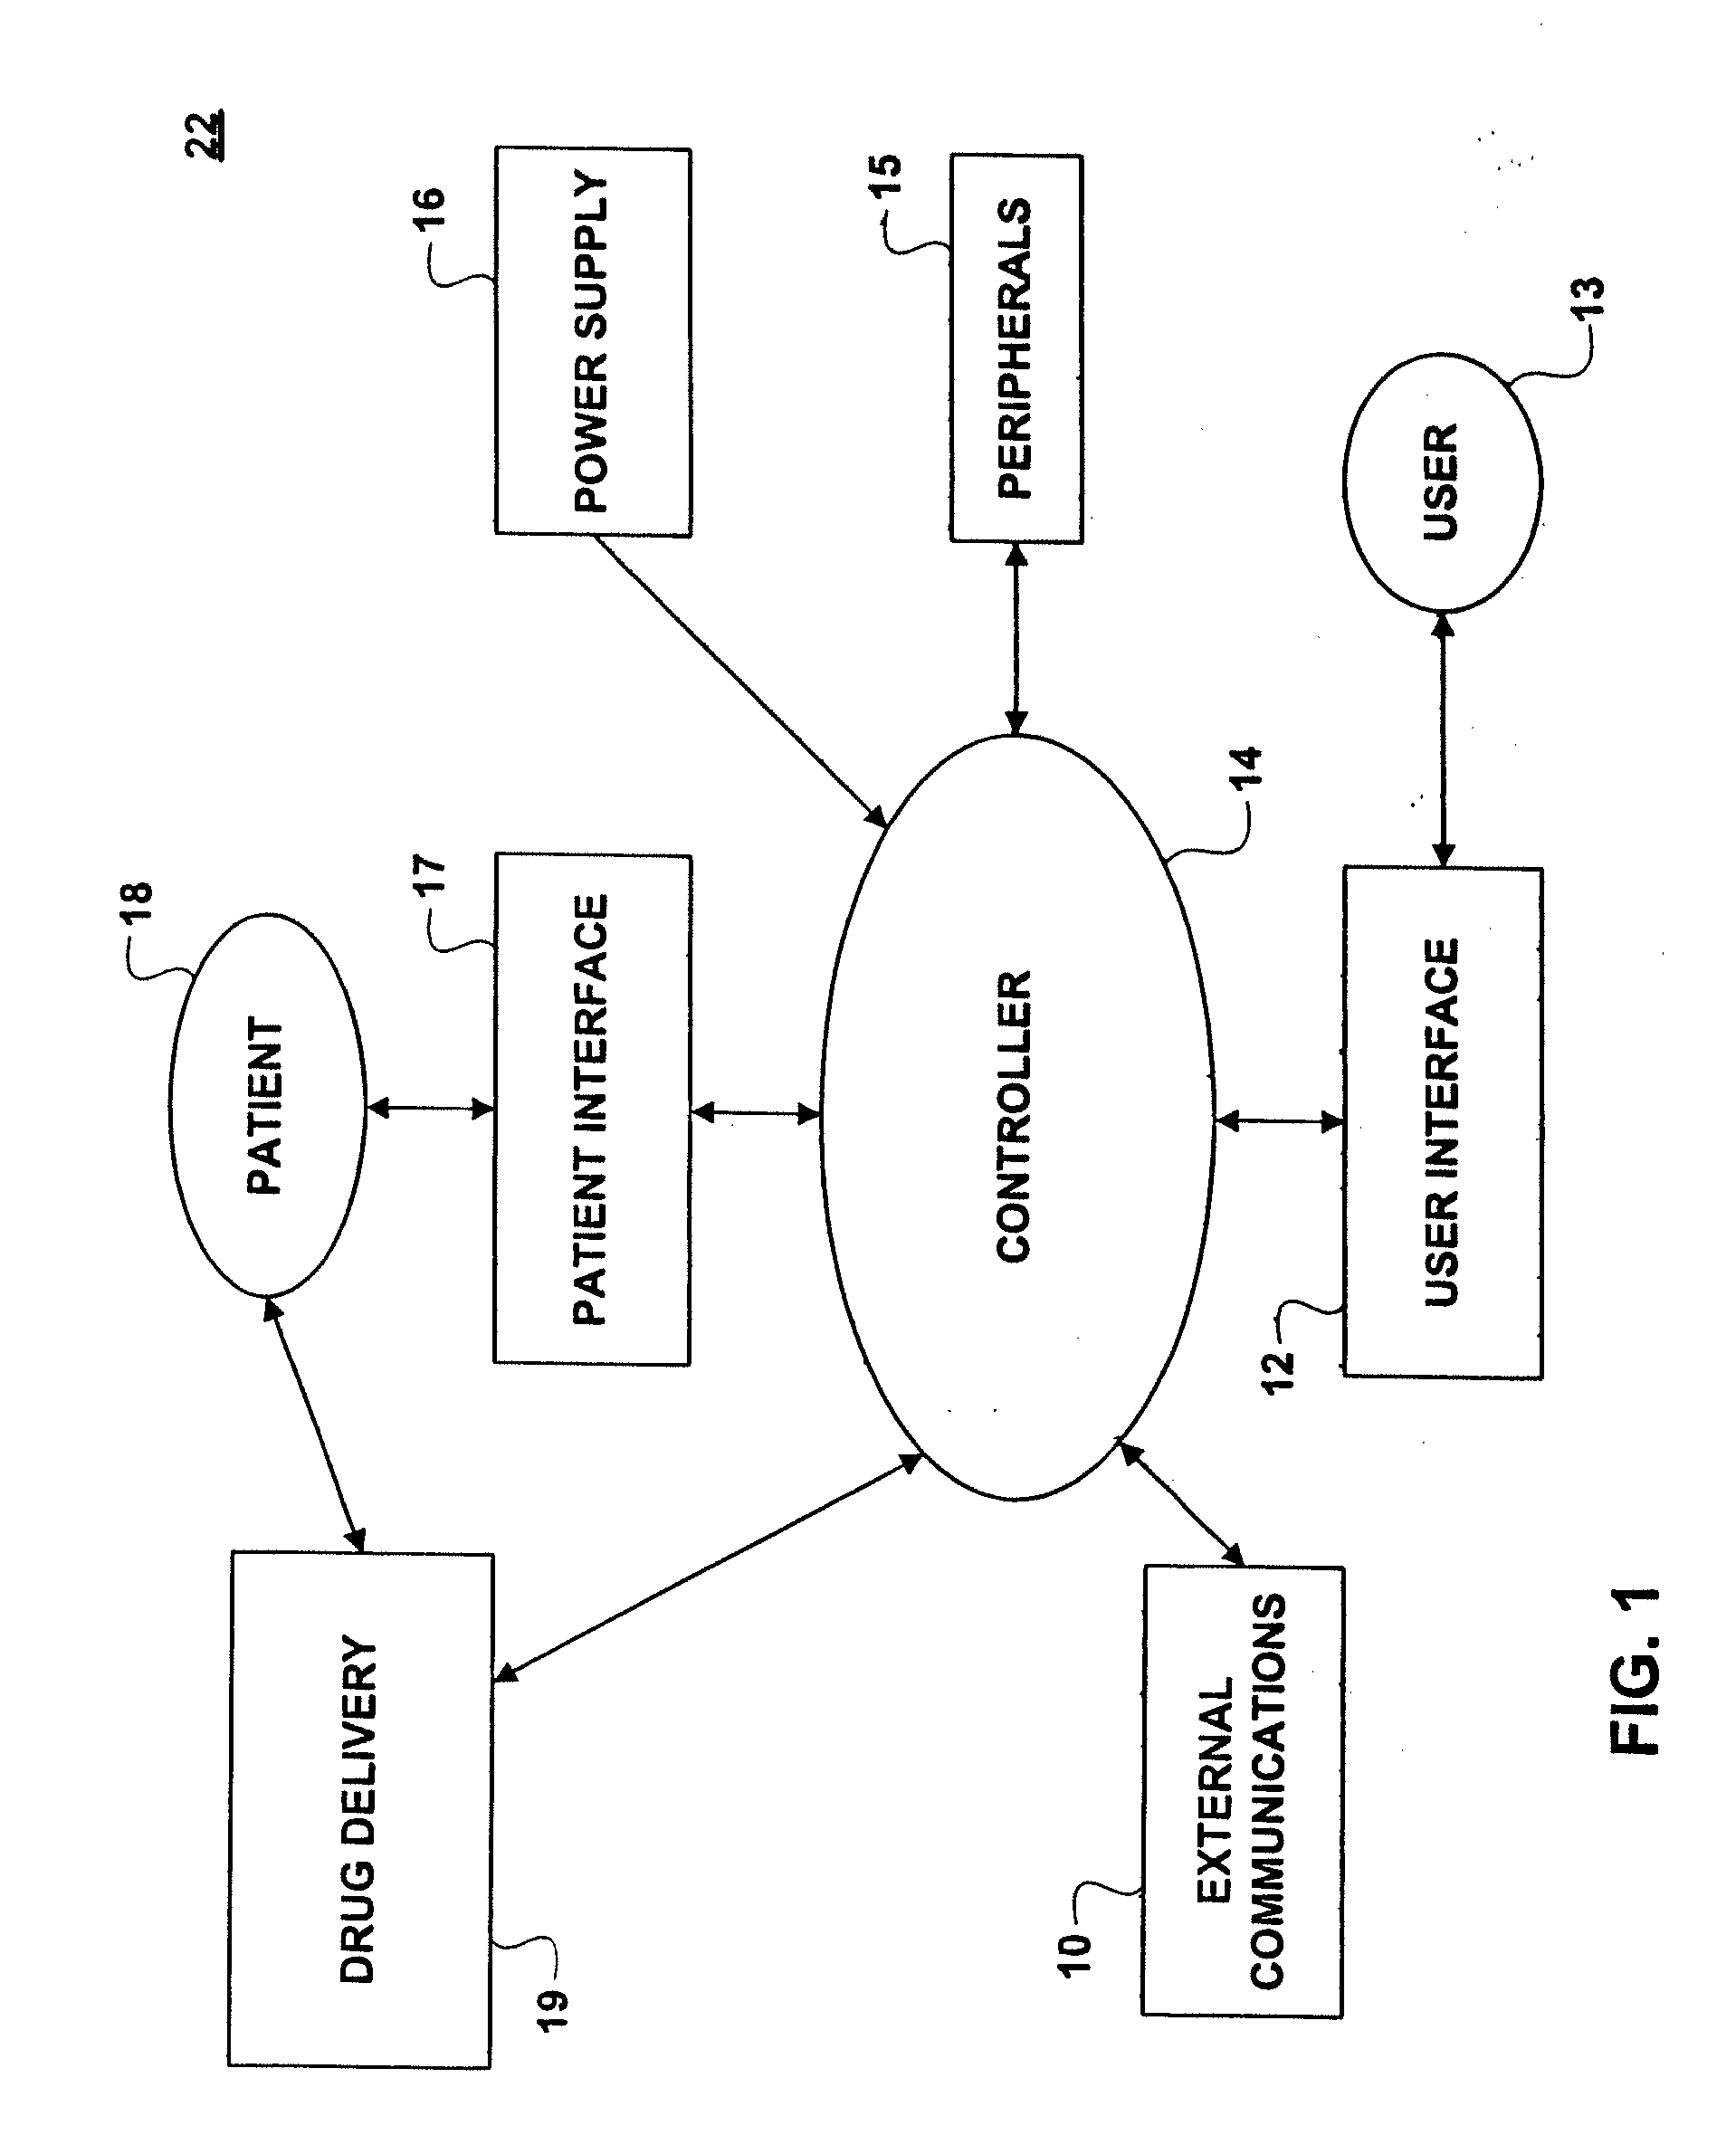 Systems and methods for providing sensor fusion